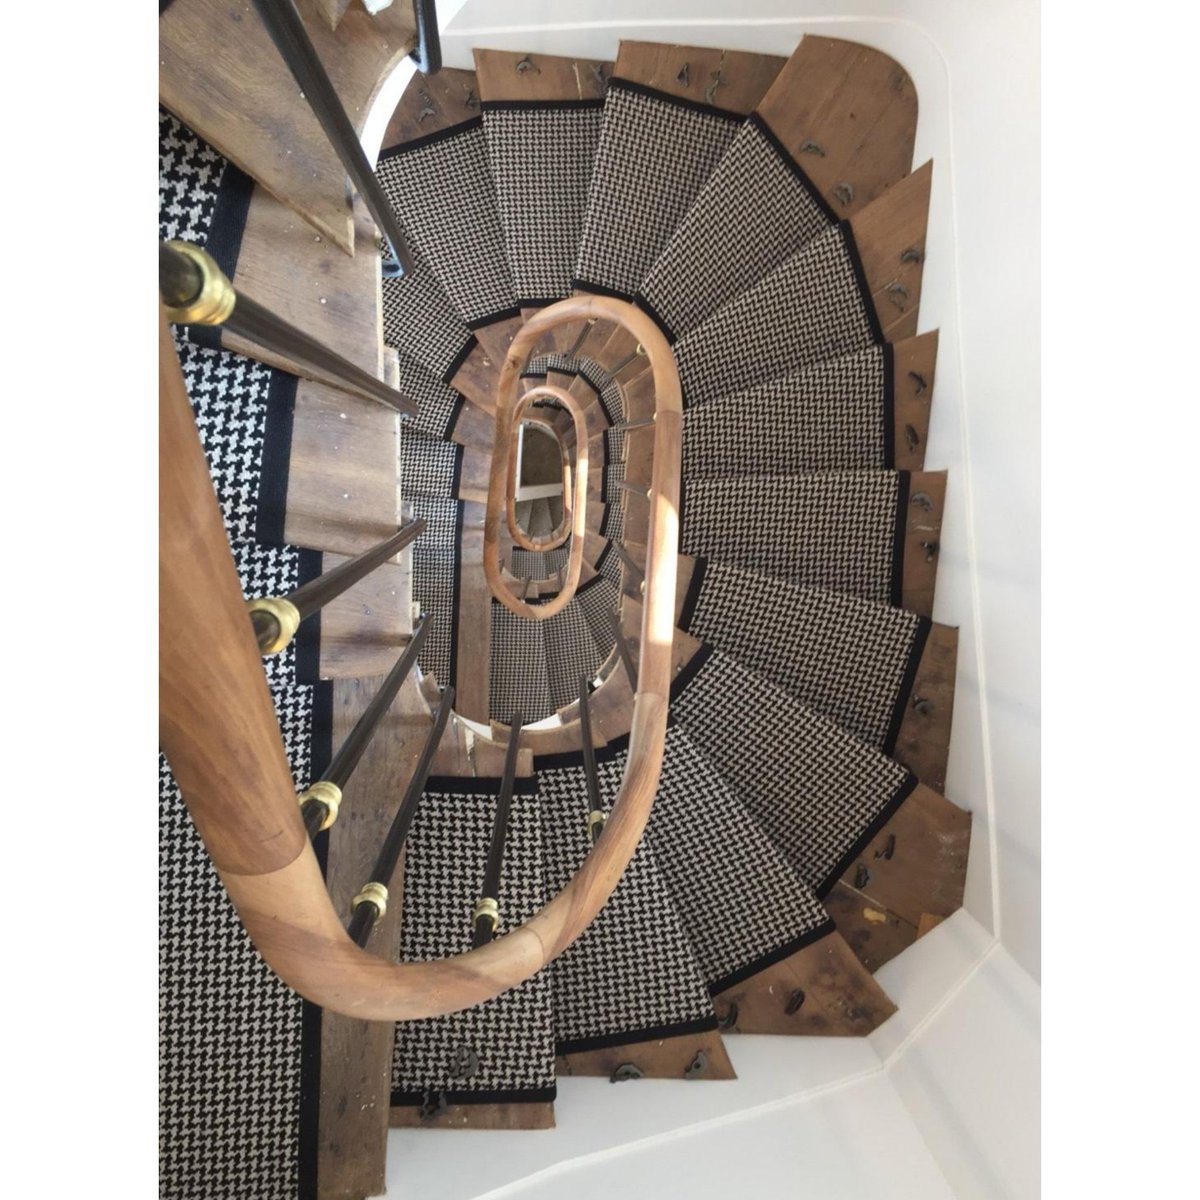 So effortlessly stylish! This taped #Houndstooth runner complements these beautiful stairs perfectly. 👌
#hartleytissier #hartleyandtissier #madeinengland #designedinfrance #flatweave #wool #carpet #stairrunner #rug #interiordesign #staircase #flooring #woodenstairs #staircarpet